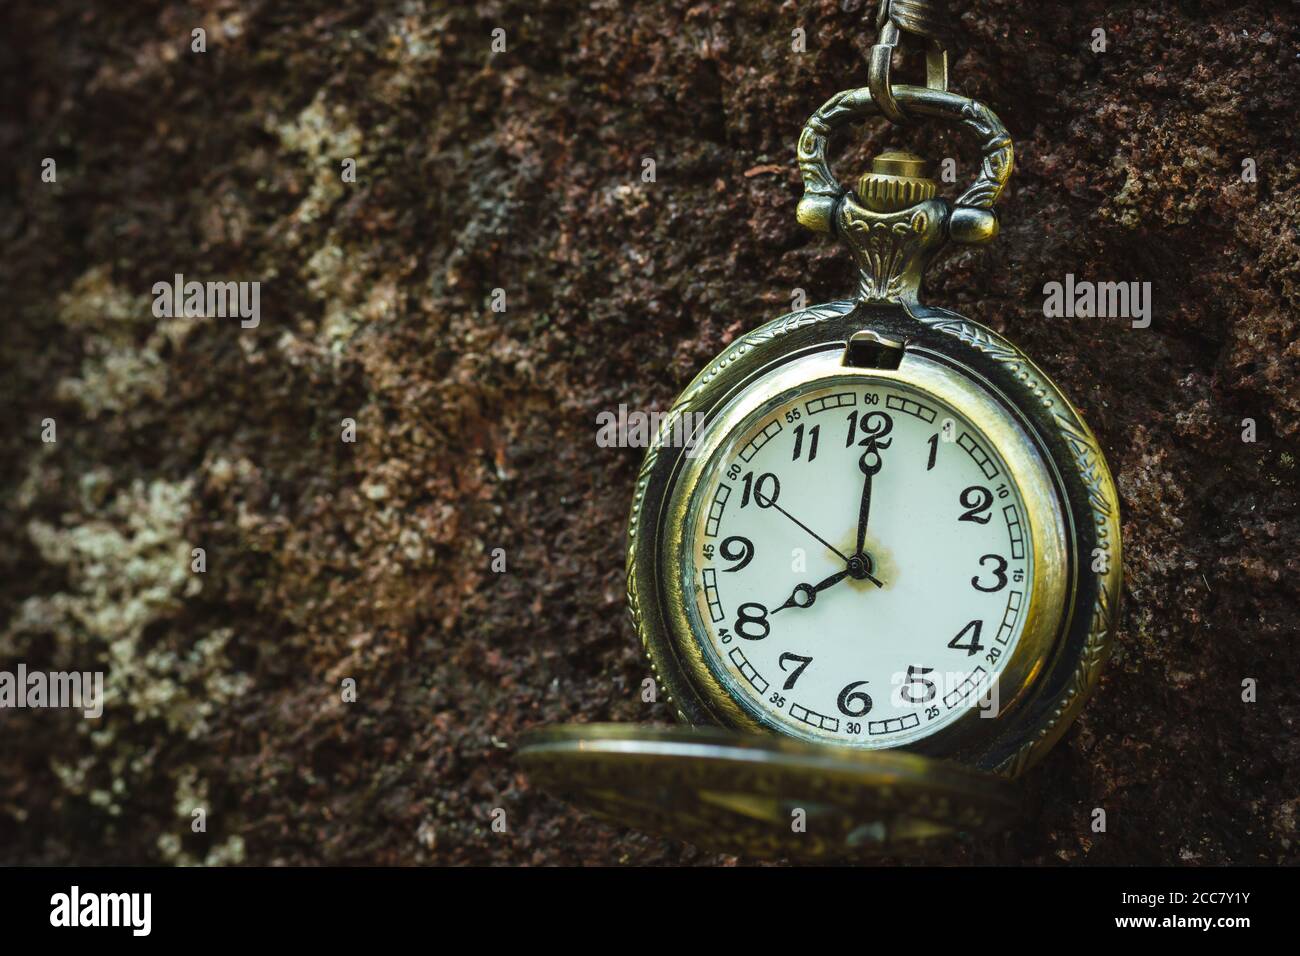 Vintage old pocket watch hanged on the rock background. At 8 o'clock. Closeup and copy space. Stock Photo